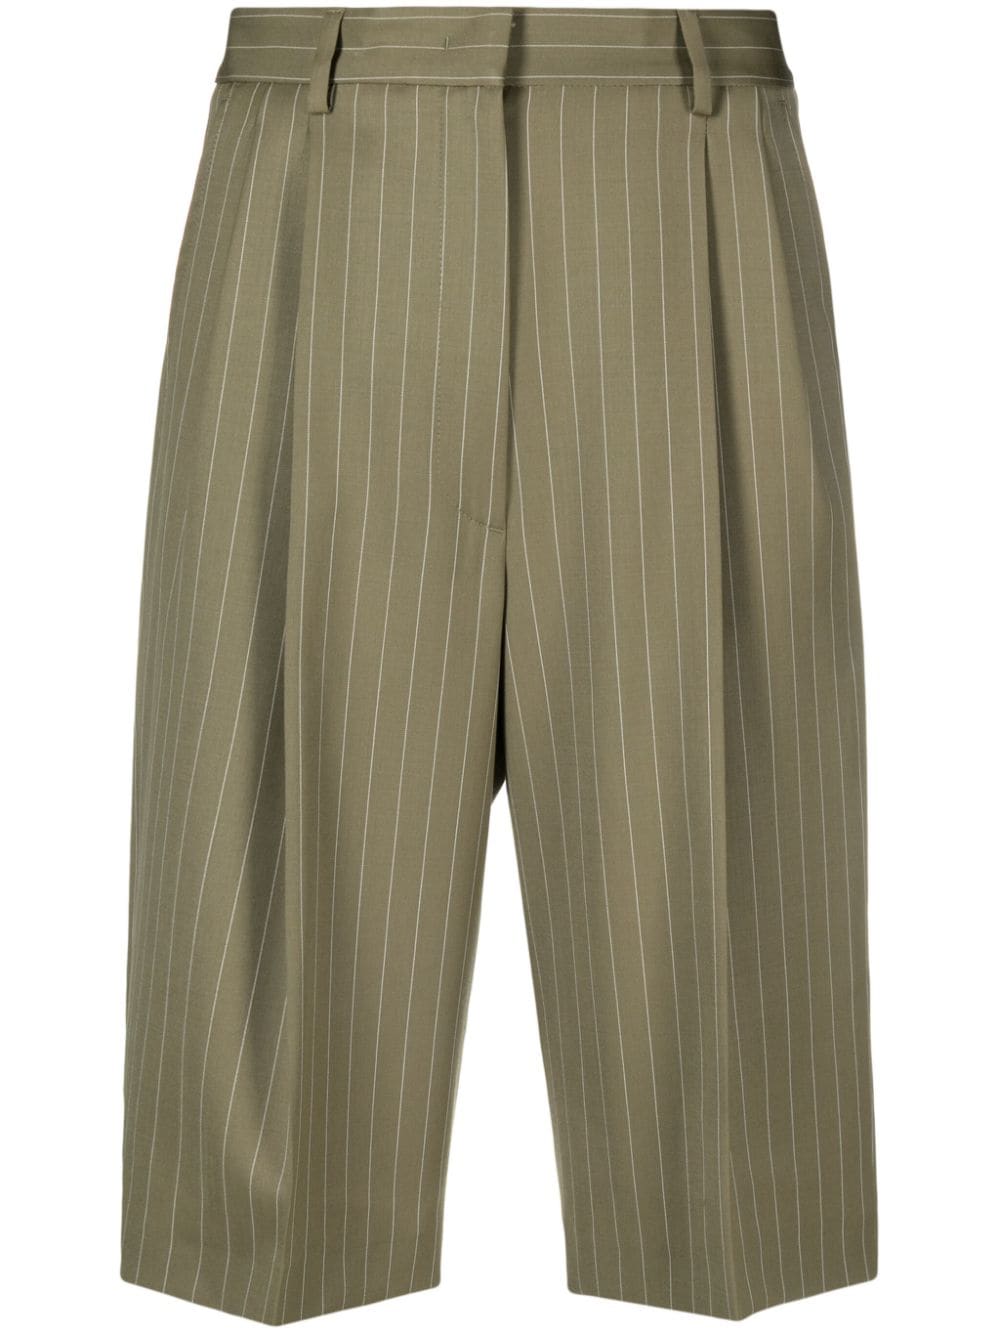 Image 1 of MSGM pinstriped tailored shorts